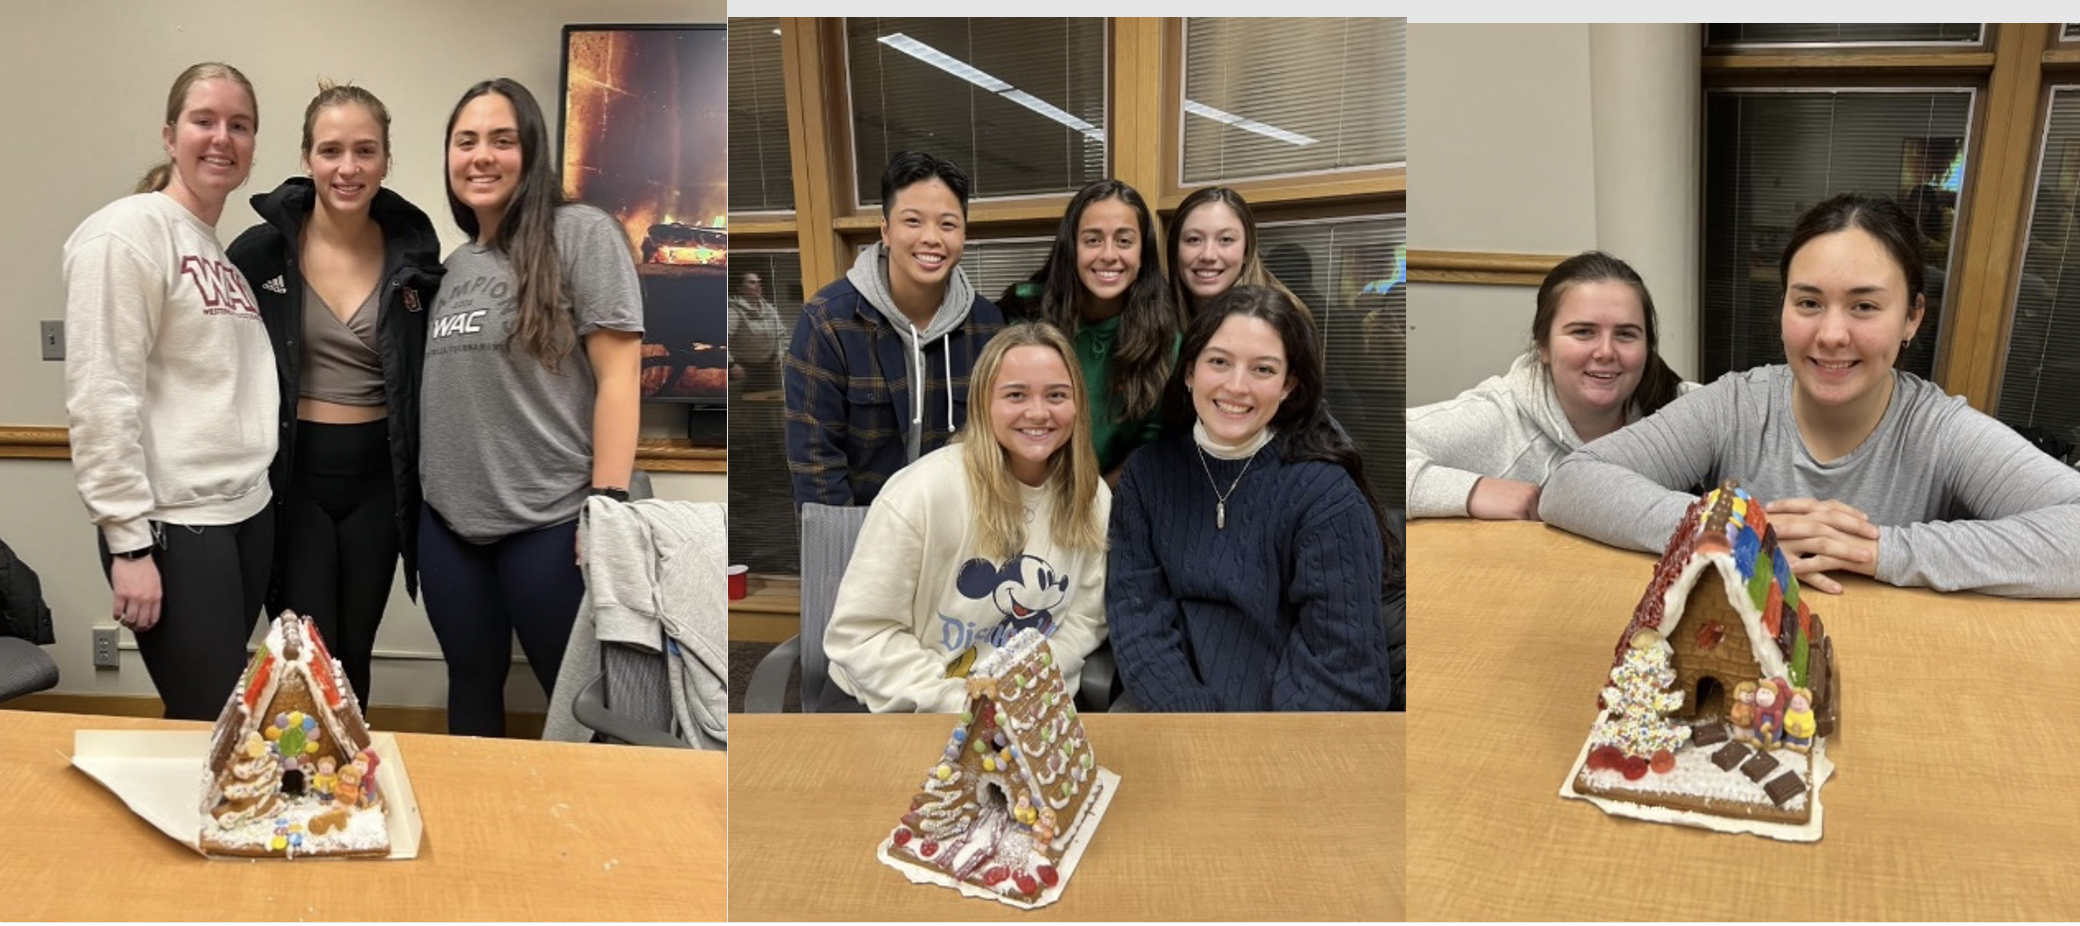 Photos of Gingerbread House Competition